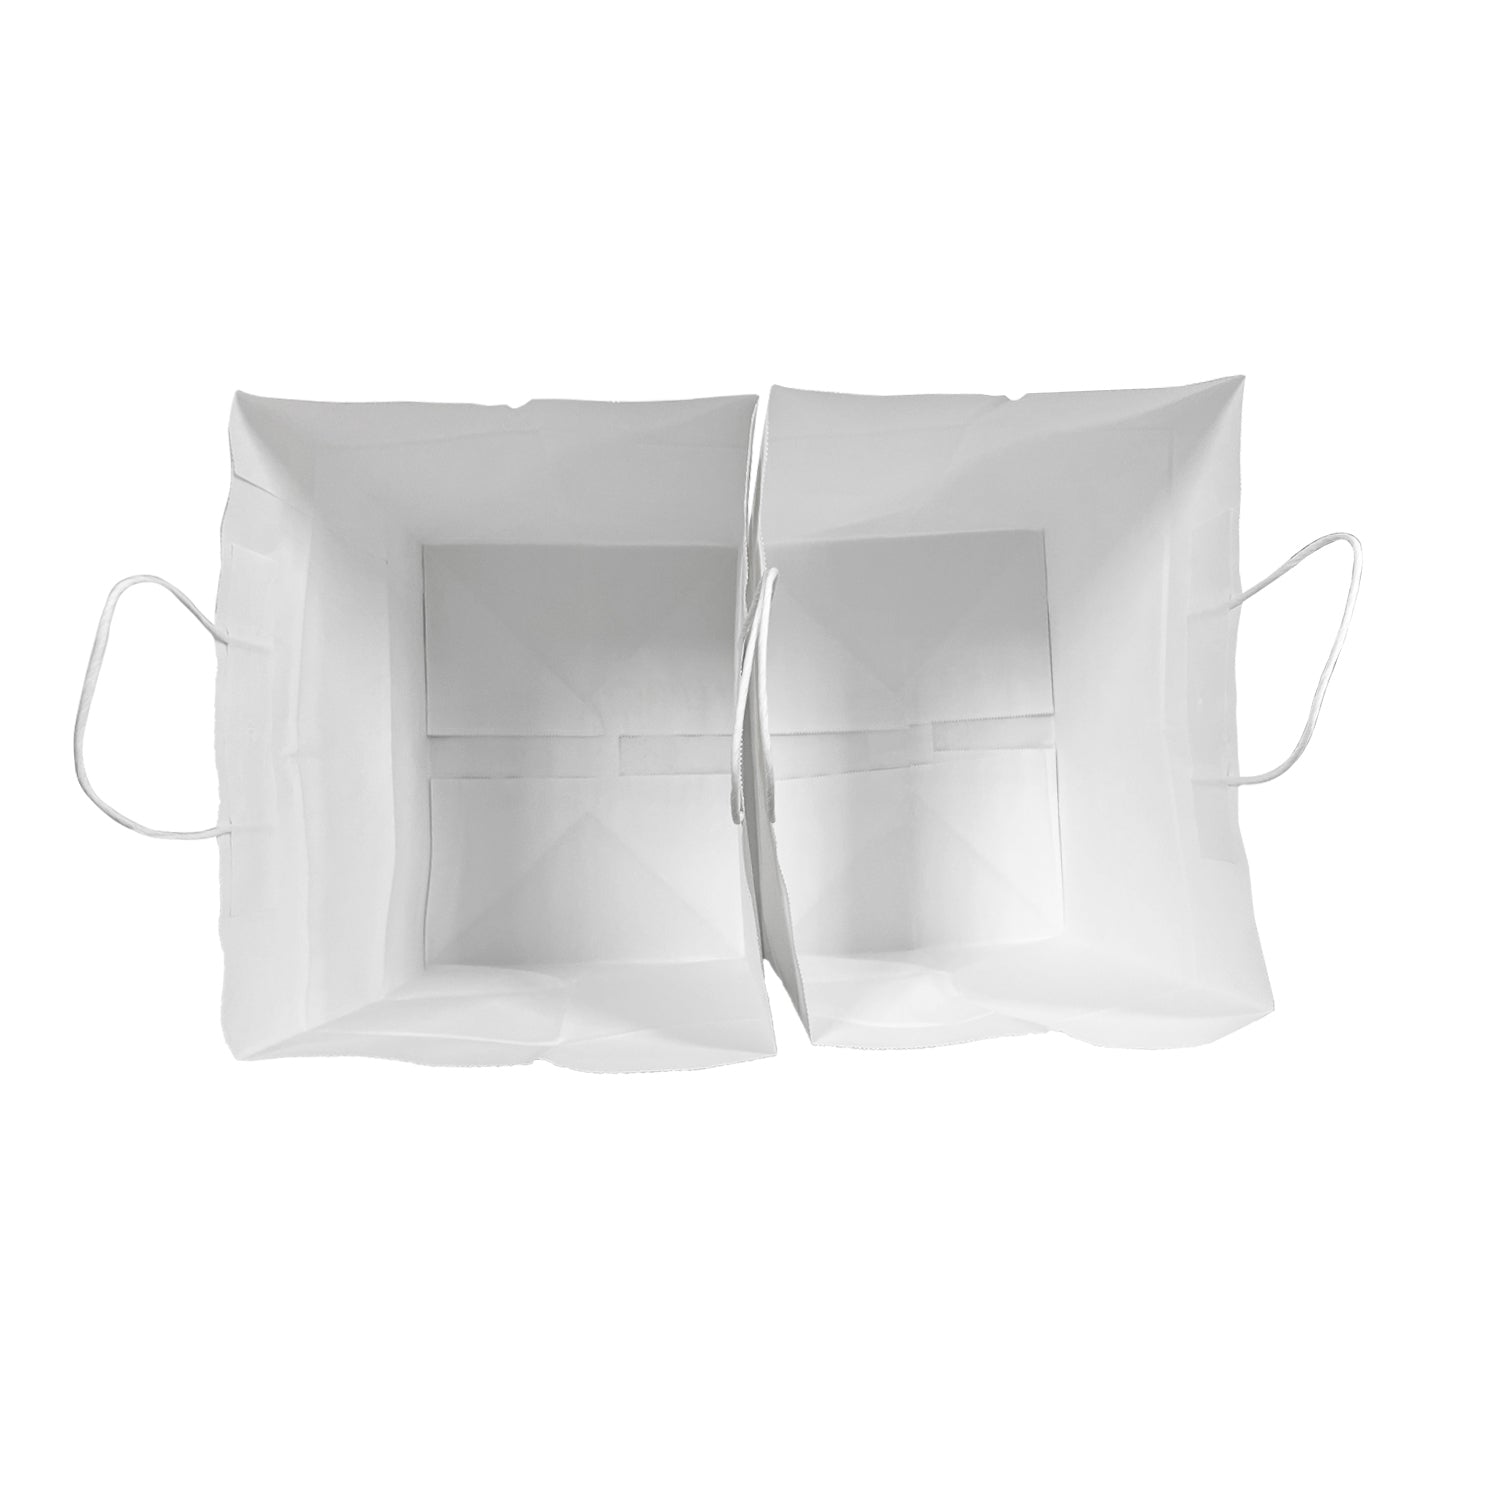 250 Pcs, Cake, 16x6x19.25 inches, White Kraft Paper Bags, with Twisted Handles